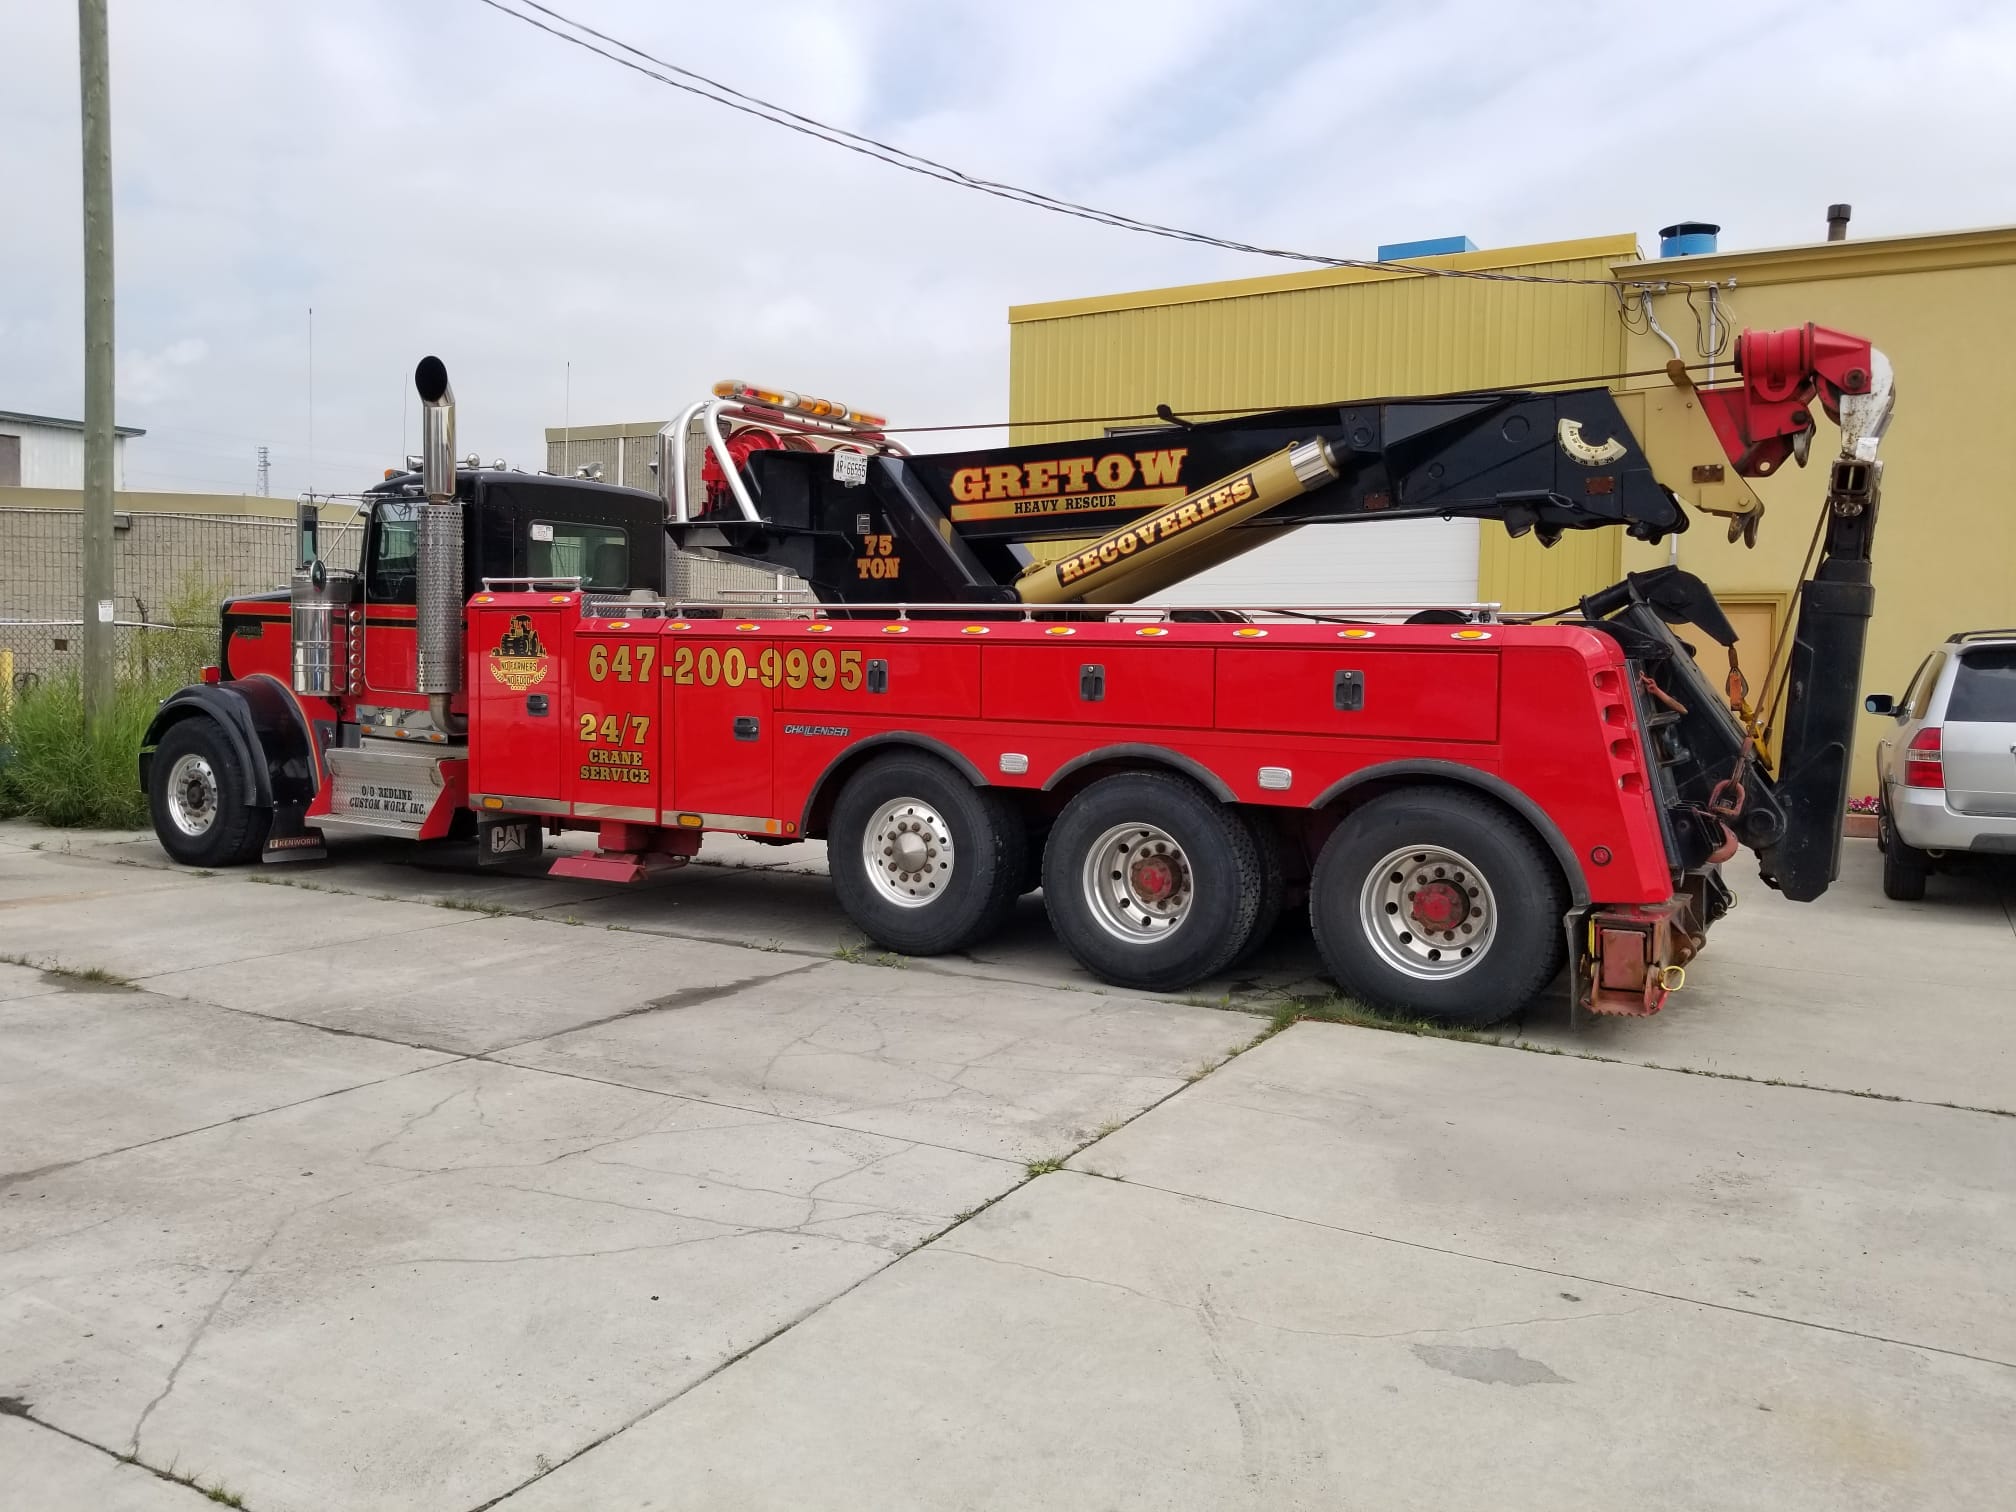 Read more about the article Gretow – The perfect name for crane services in Sudbury, New Market, Aurora, Thornhill